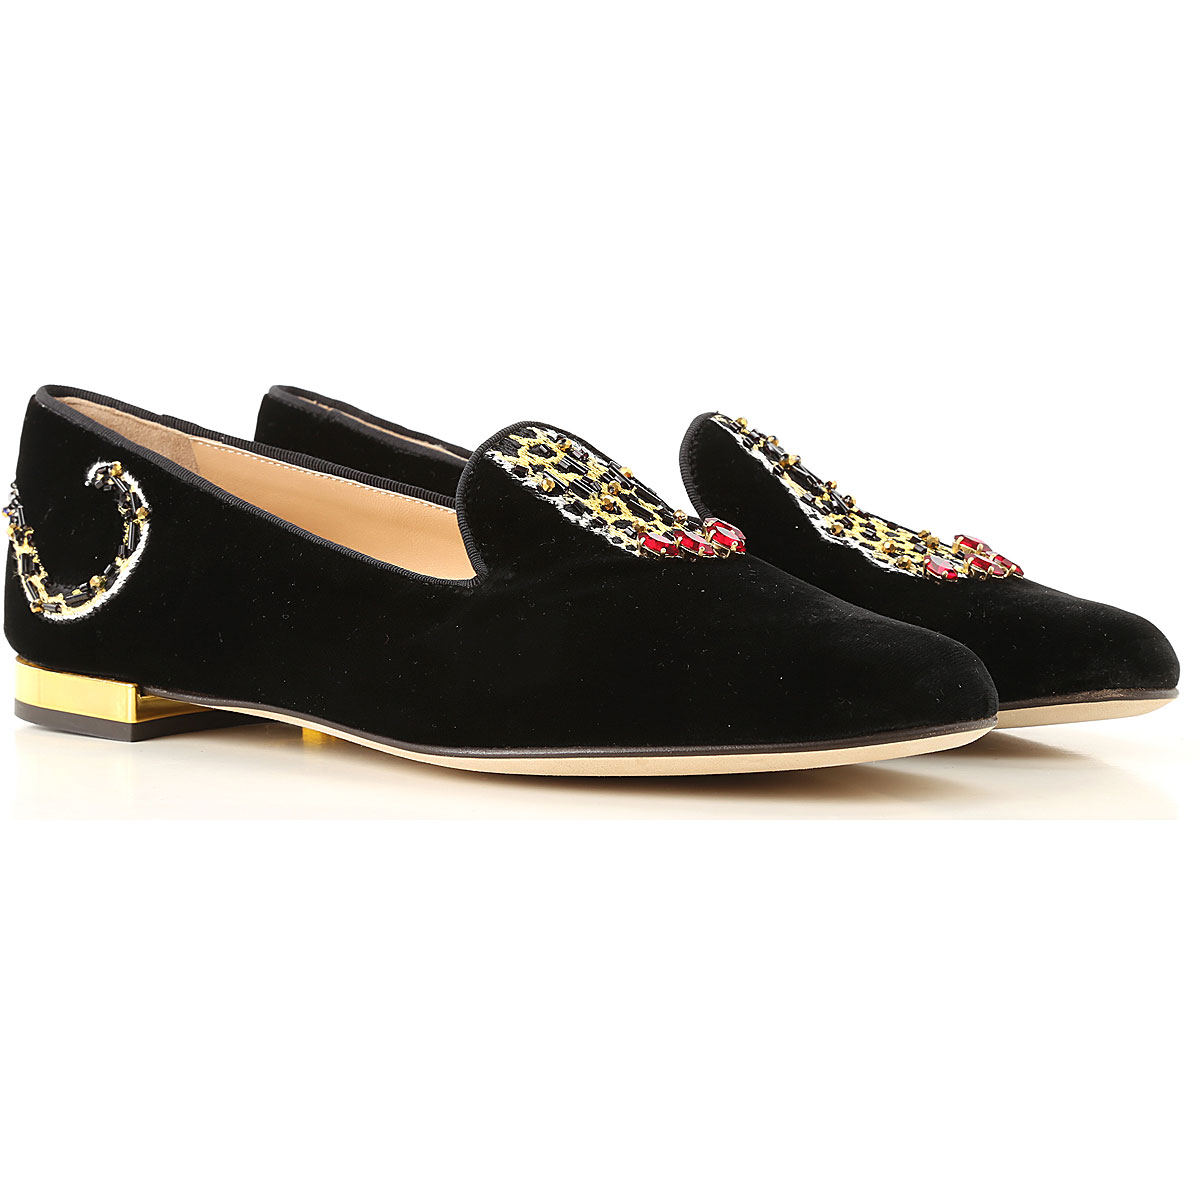 Womens Shoes Charlotte Olympia , Style code: 0lp185977a-8012-